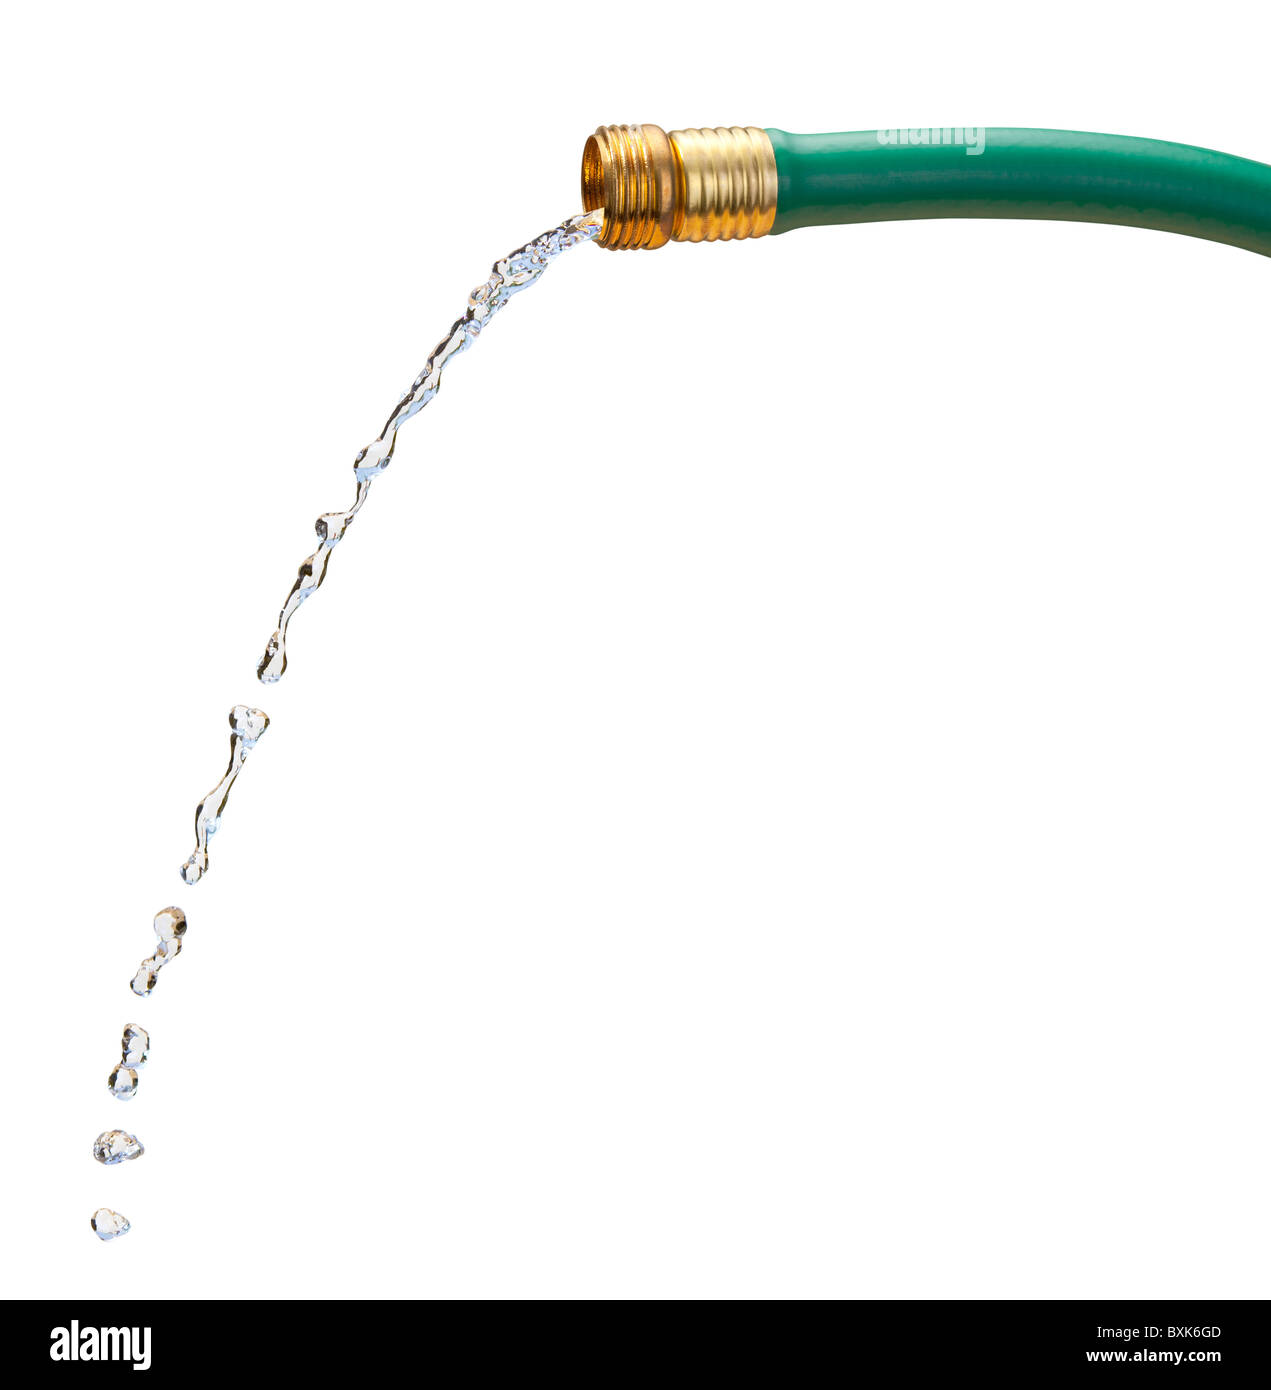 Water Hose Isolated on a white background. Stock Photo